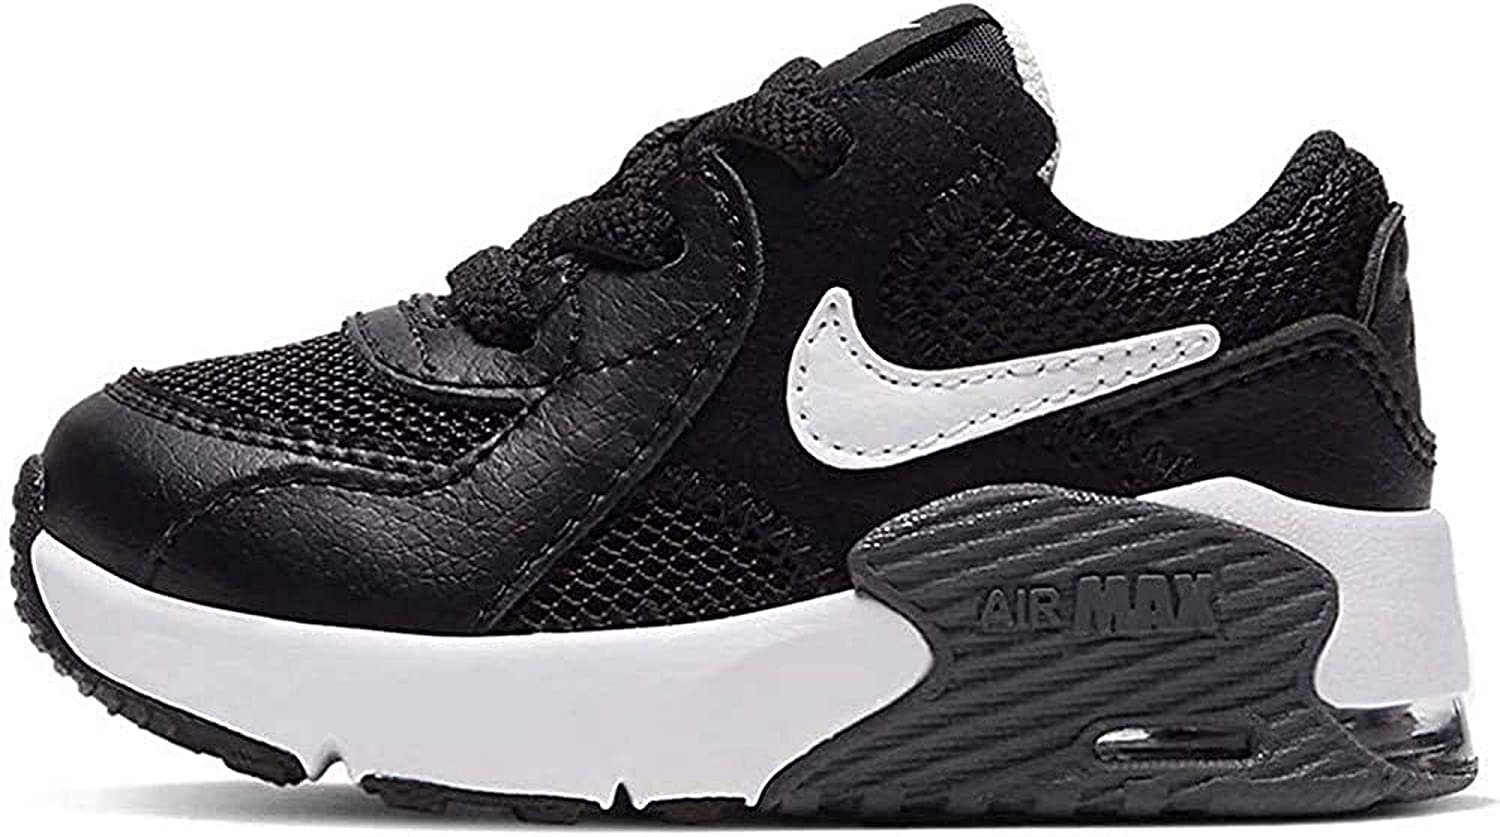 Nike Boys' Toddler Air Max Excee Casual Shoes (Black/White/Dark Grey, Numeric_4) - image 1 of 7